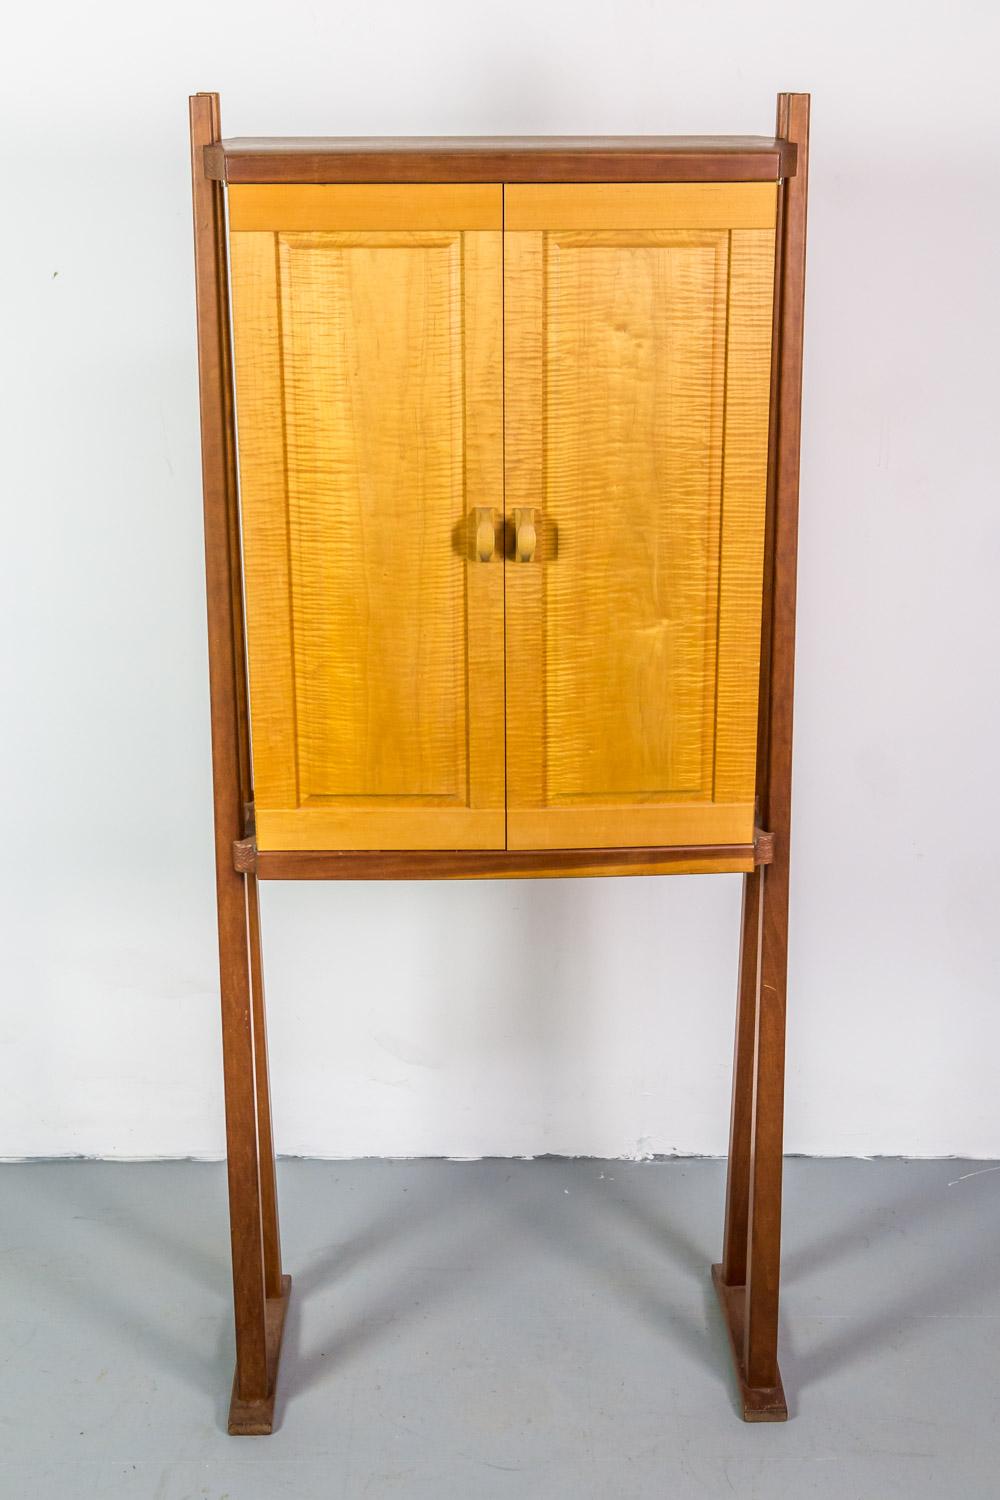 Glass Studio Cabinet in Wood by American Craftsman Mike Bartell For Sale